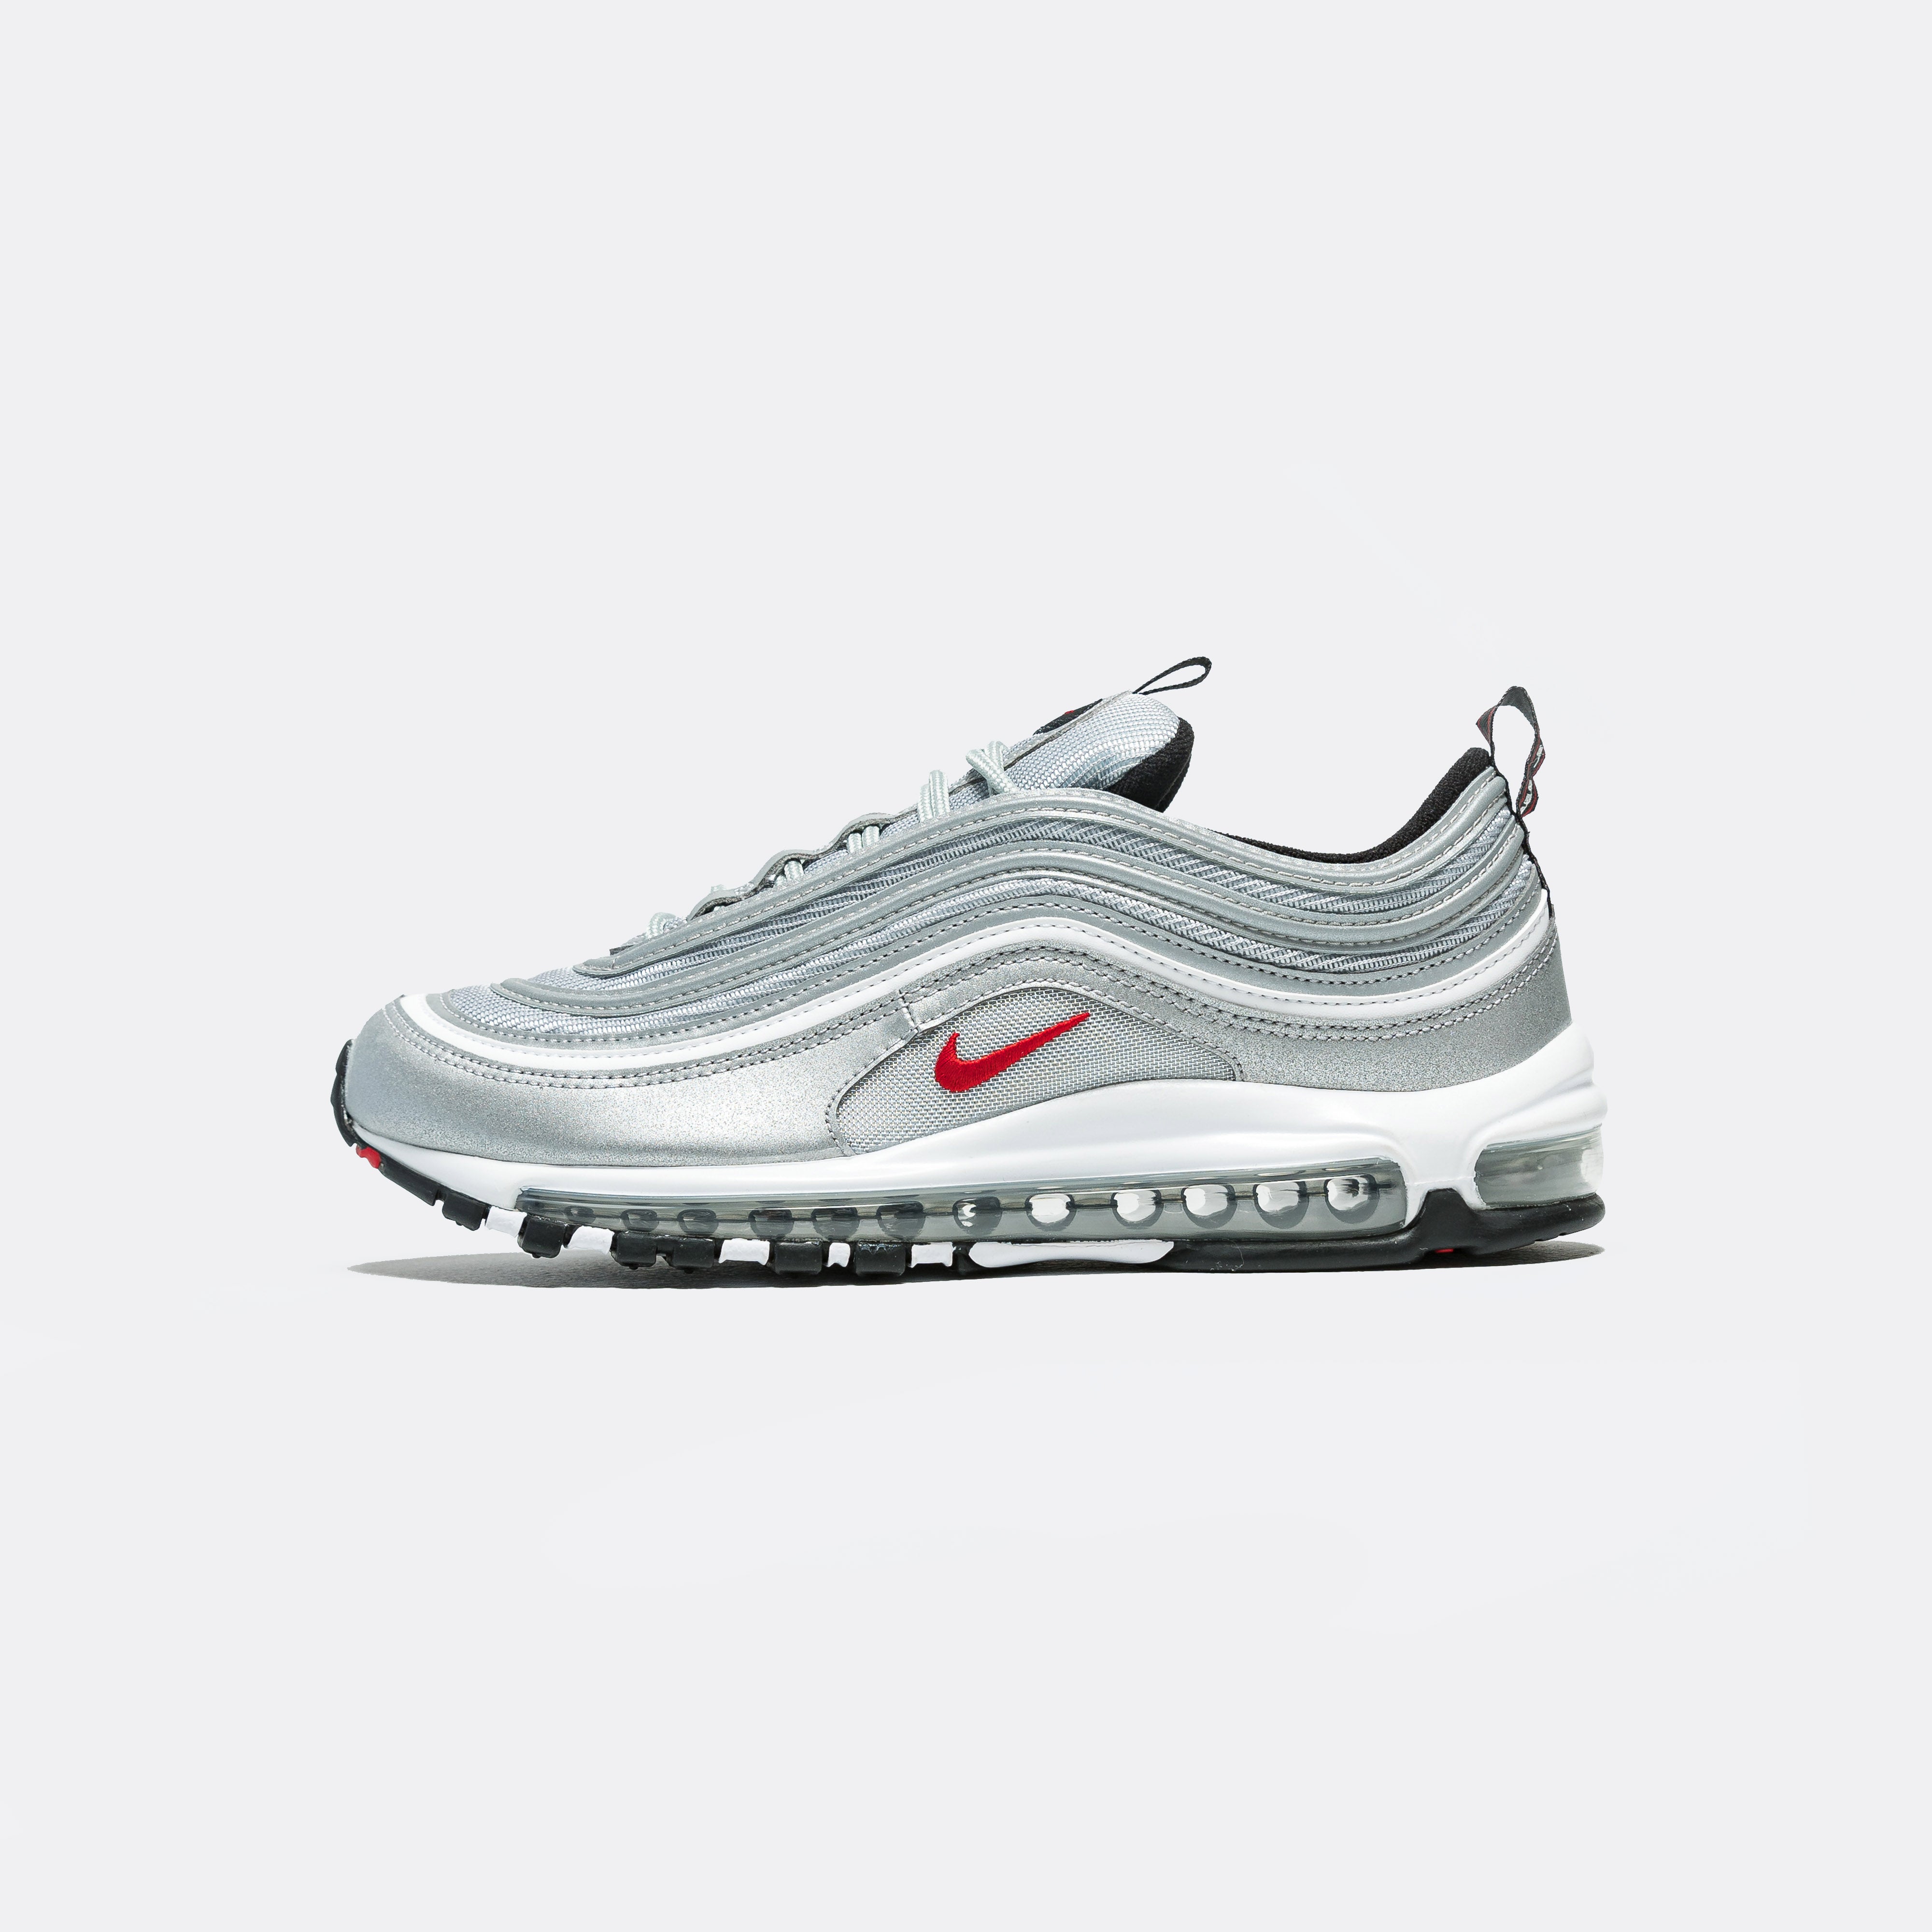 Nike Air Max 97 OG 'Silver Bullet' - Metallic Silver | There